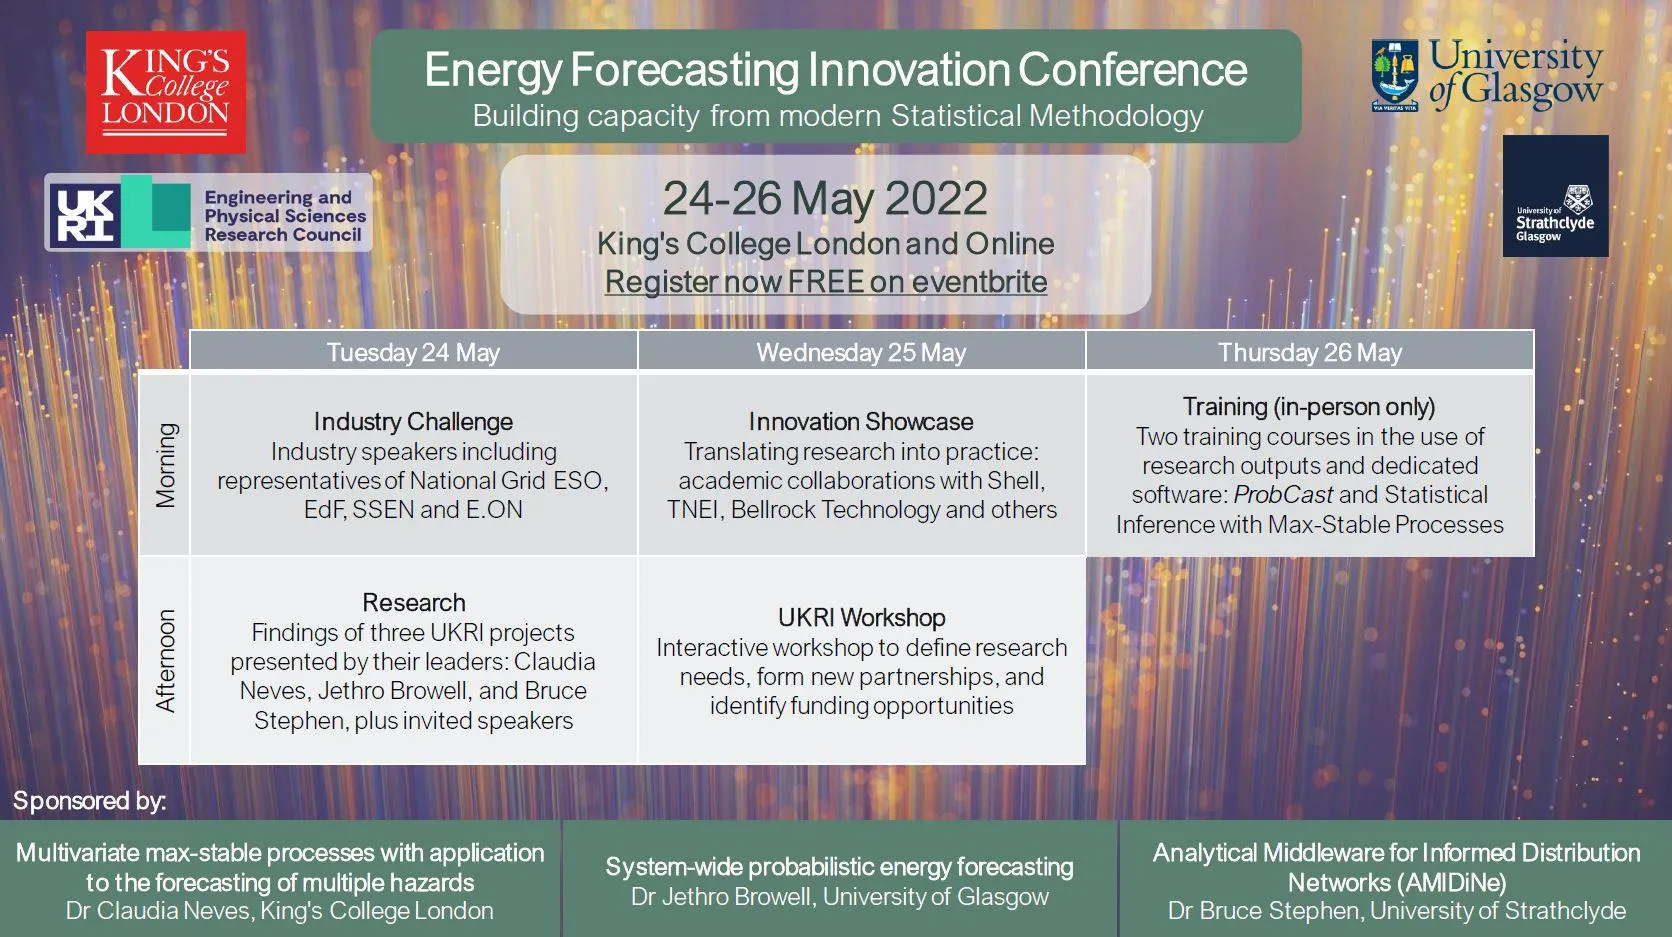 Energy Forecasting Innovation Conference